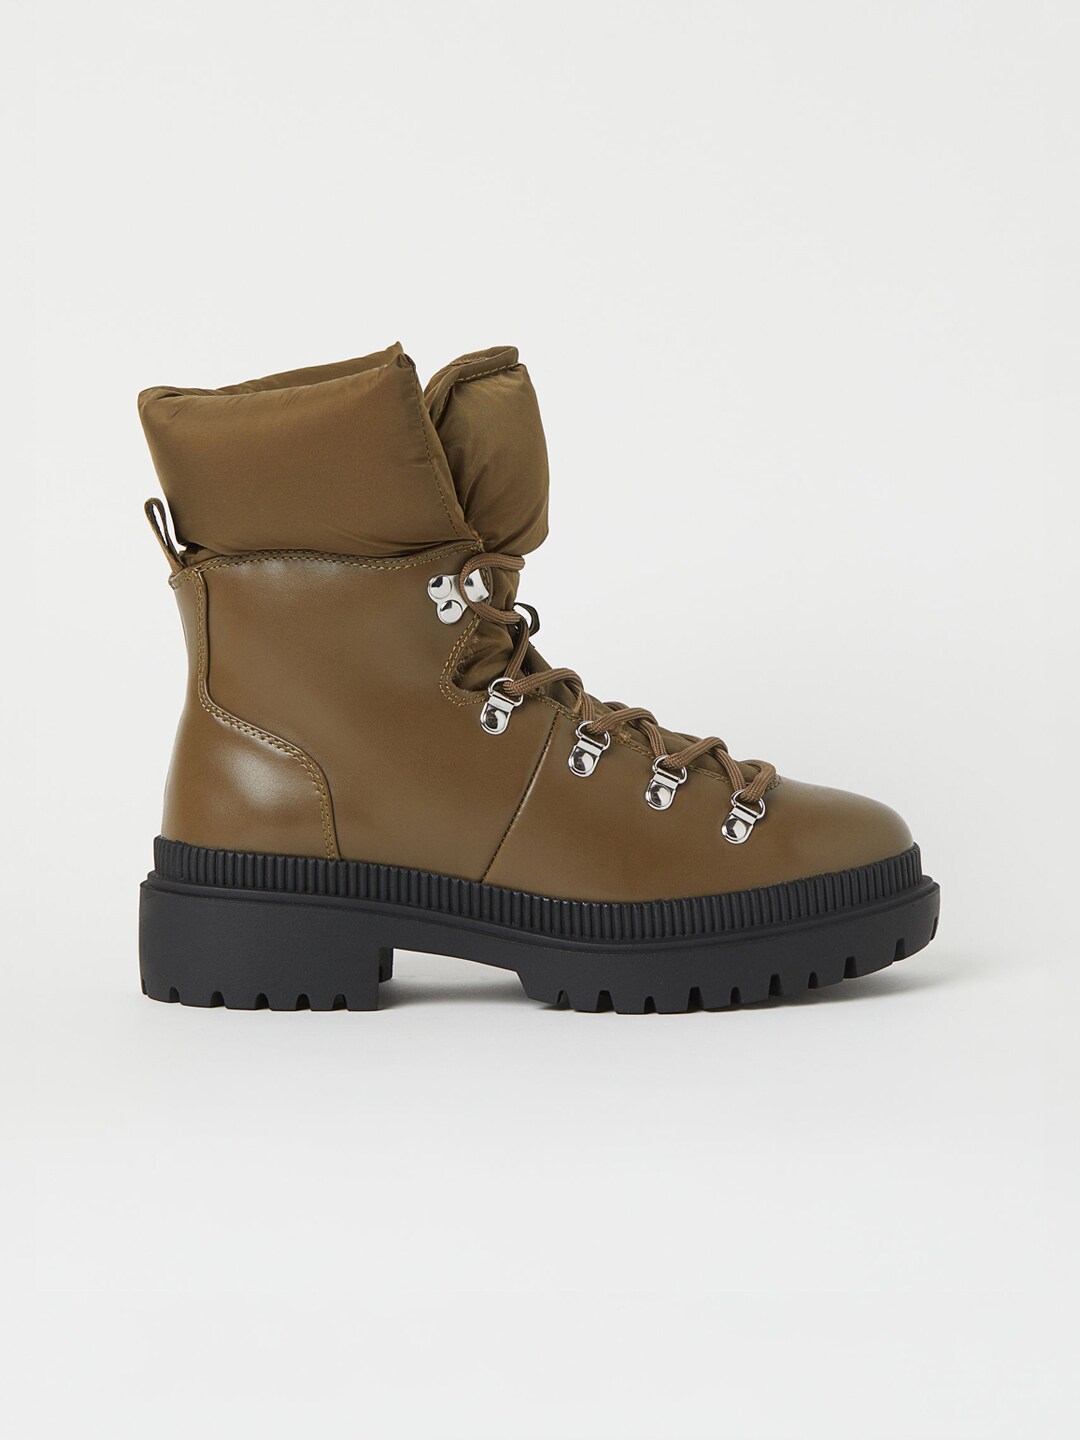 H&M Women Khaki Green Mid-Top Warm-Lined Boots Price in India